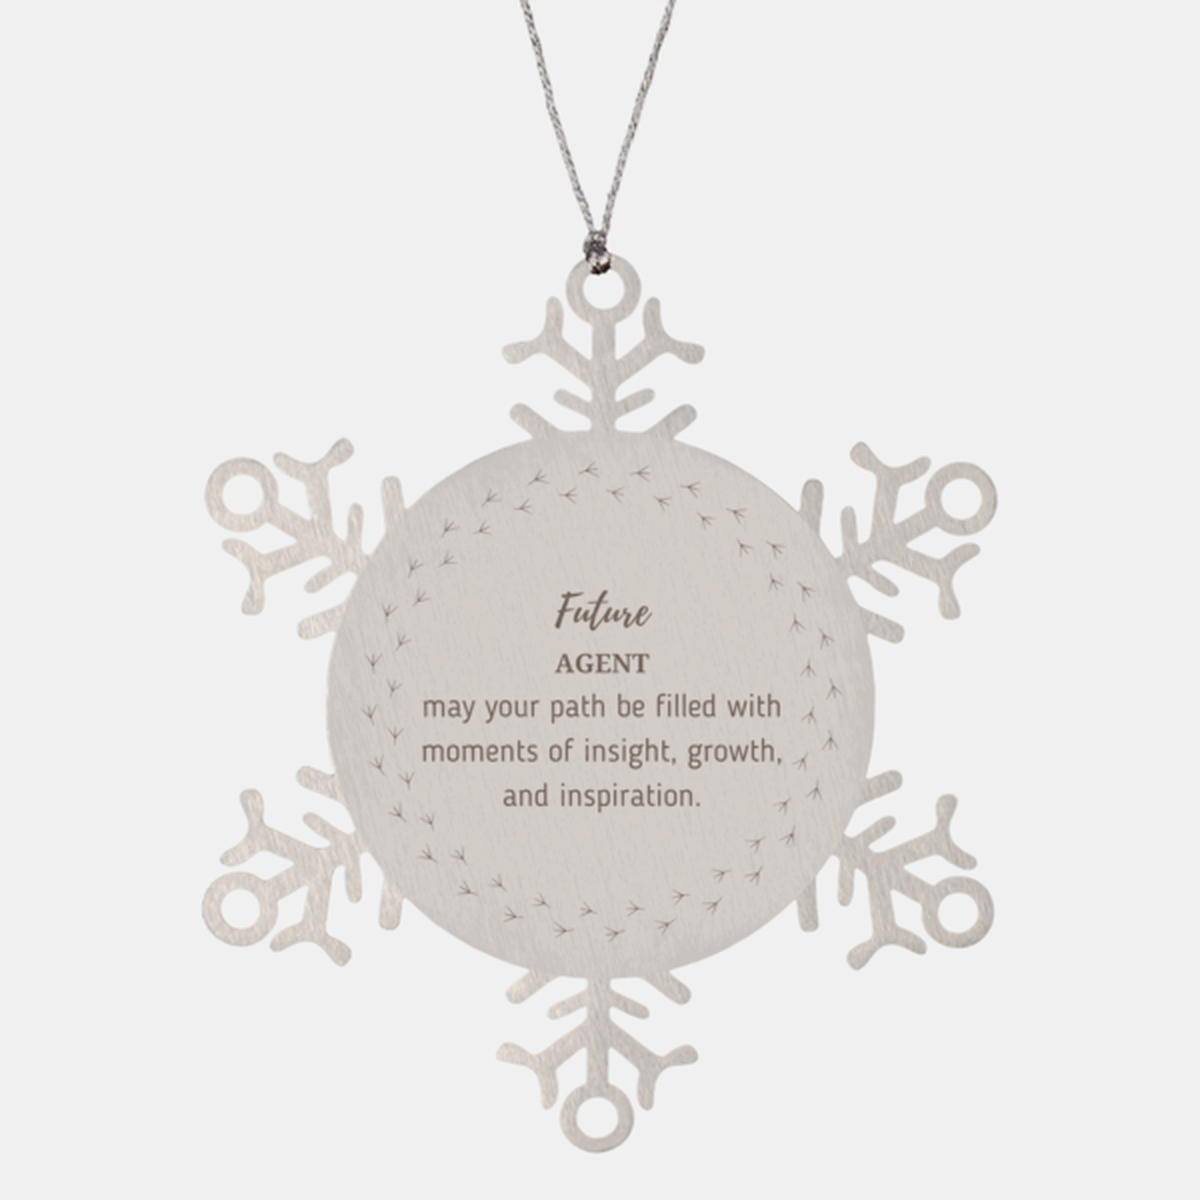 Future Agent Gifts, May your path be filled with moments of insight, Graduation Gifts for New Agent, Christmas Unique Snowflake Ornament For Men, Women, Friends